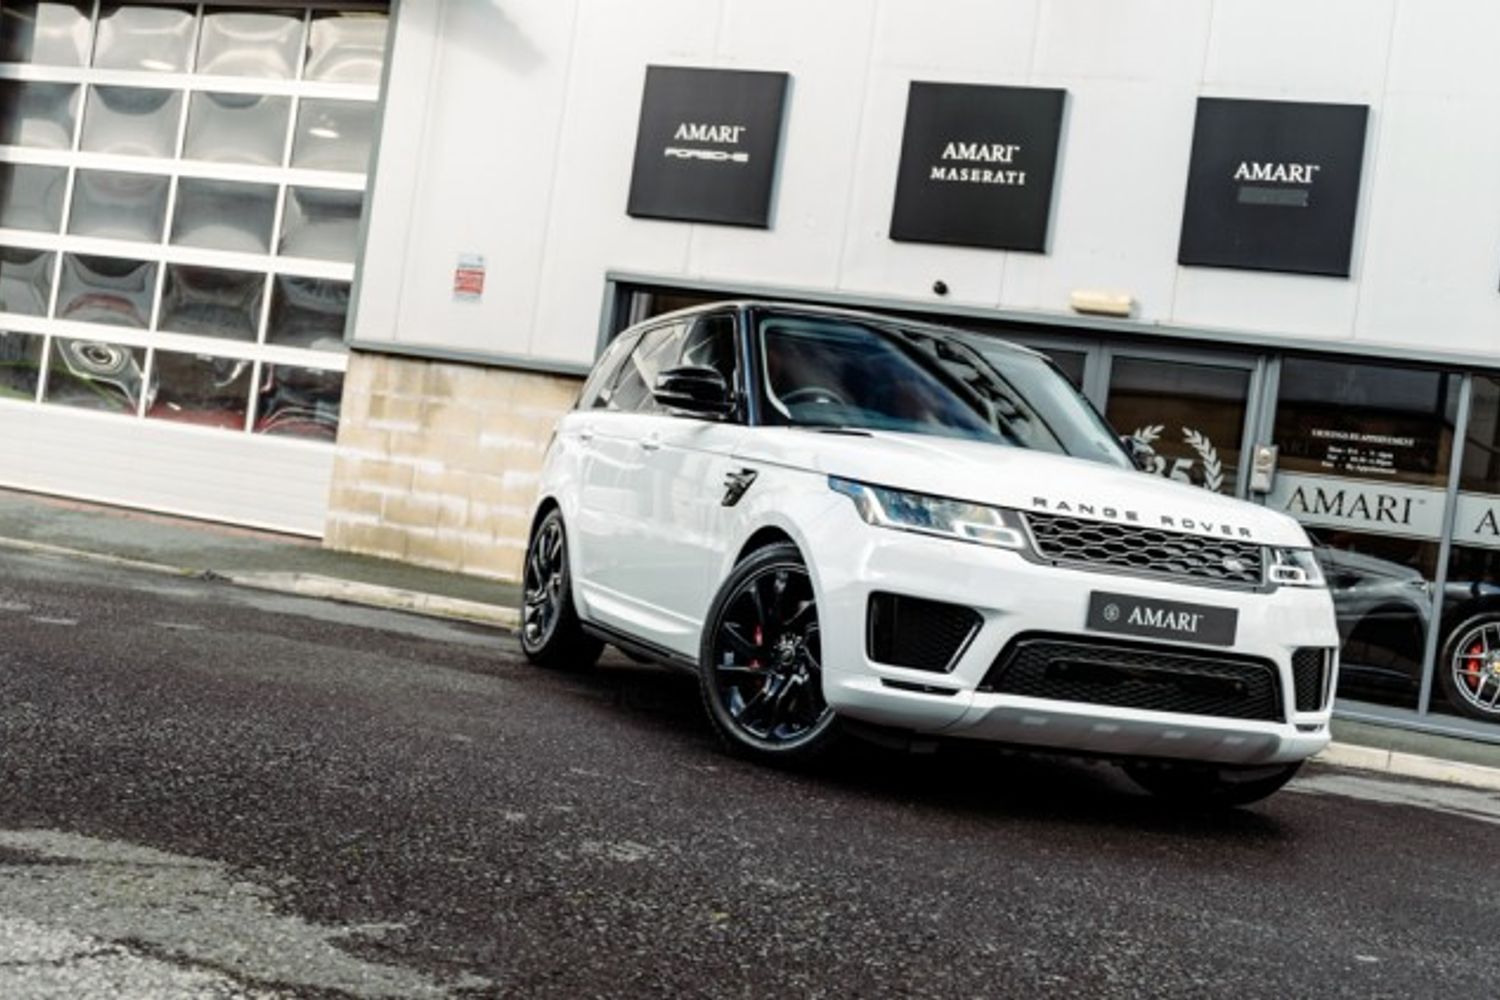 LAND ROVER RANGE ROVER SPORT HYBRID ELECTRIC ESTATE 2.0 HSE DYNAMIC 5DR AUTOMATIC